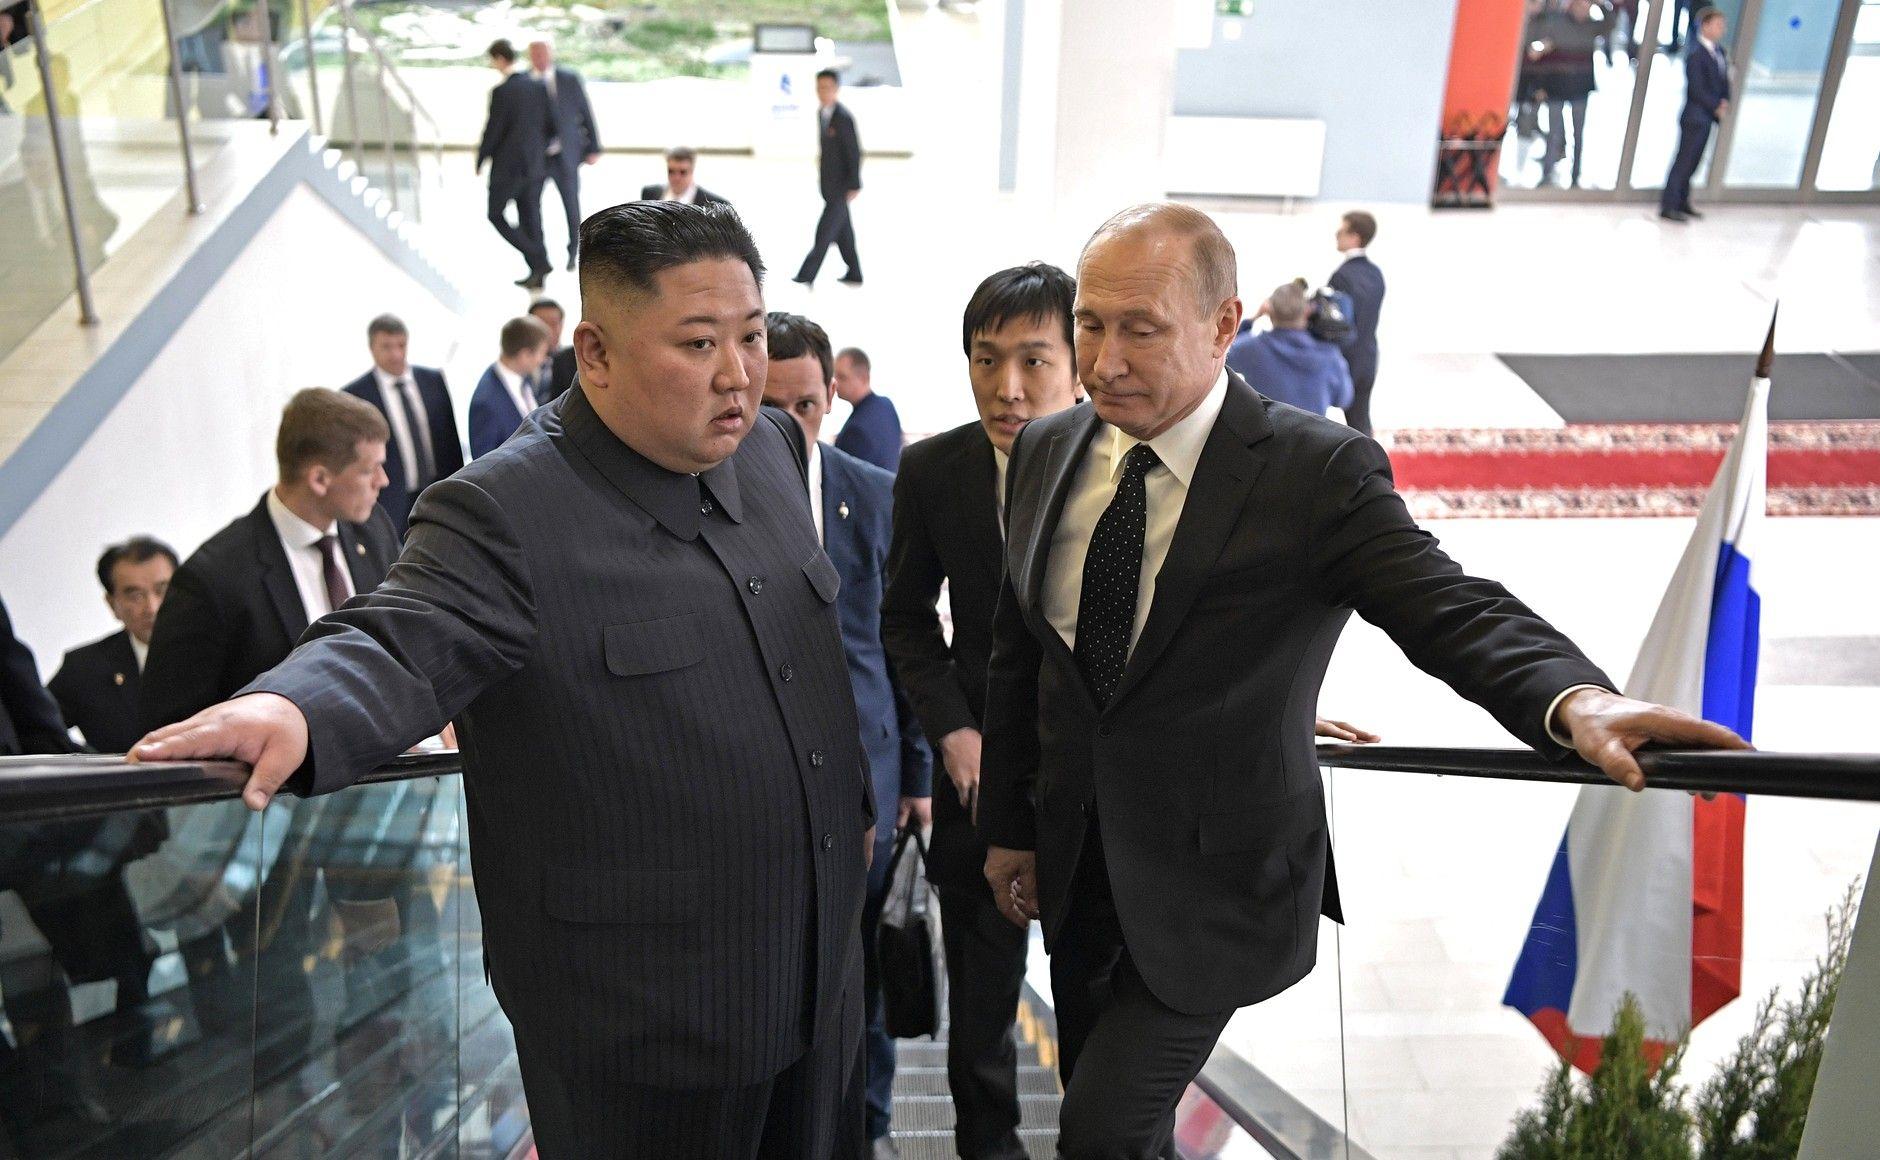 Expert: Putin – Kim Jong-un’s Summit to Have Big Impact on the Way US Approach Korean Question